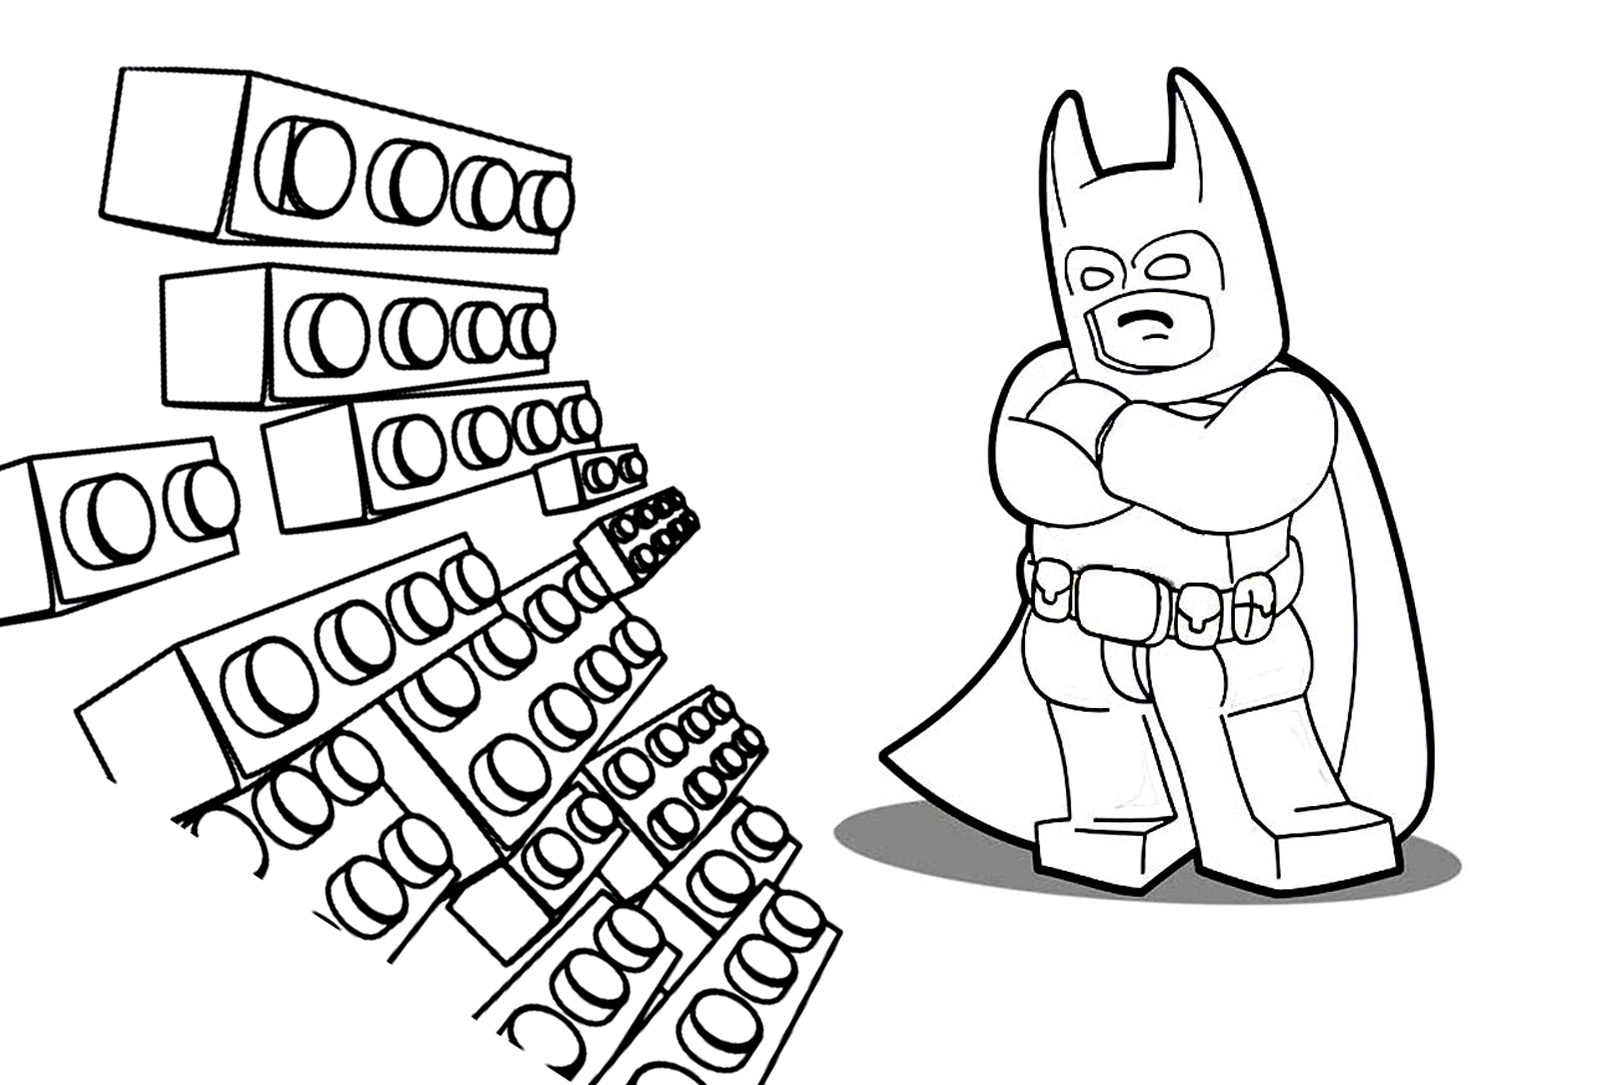 Lego movie coloring pages - Coloring for kids : coloring-adventure ...